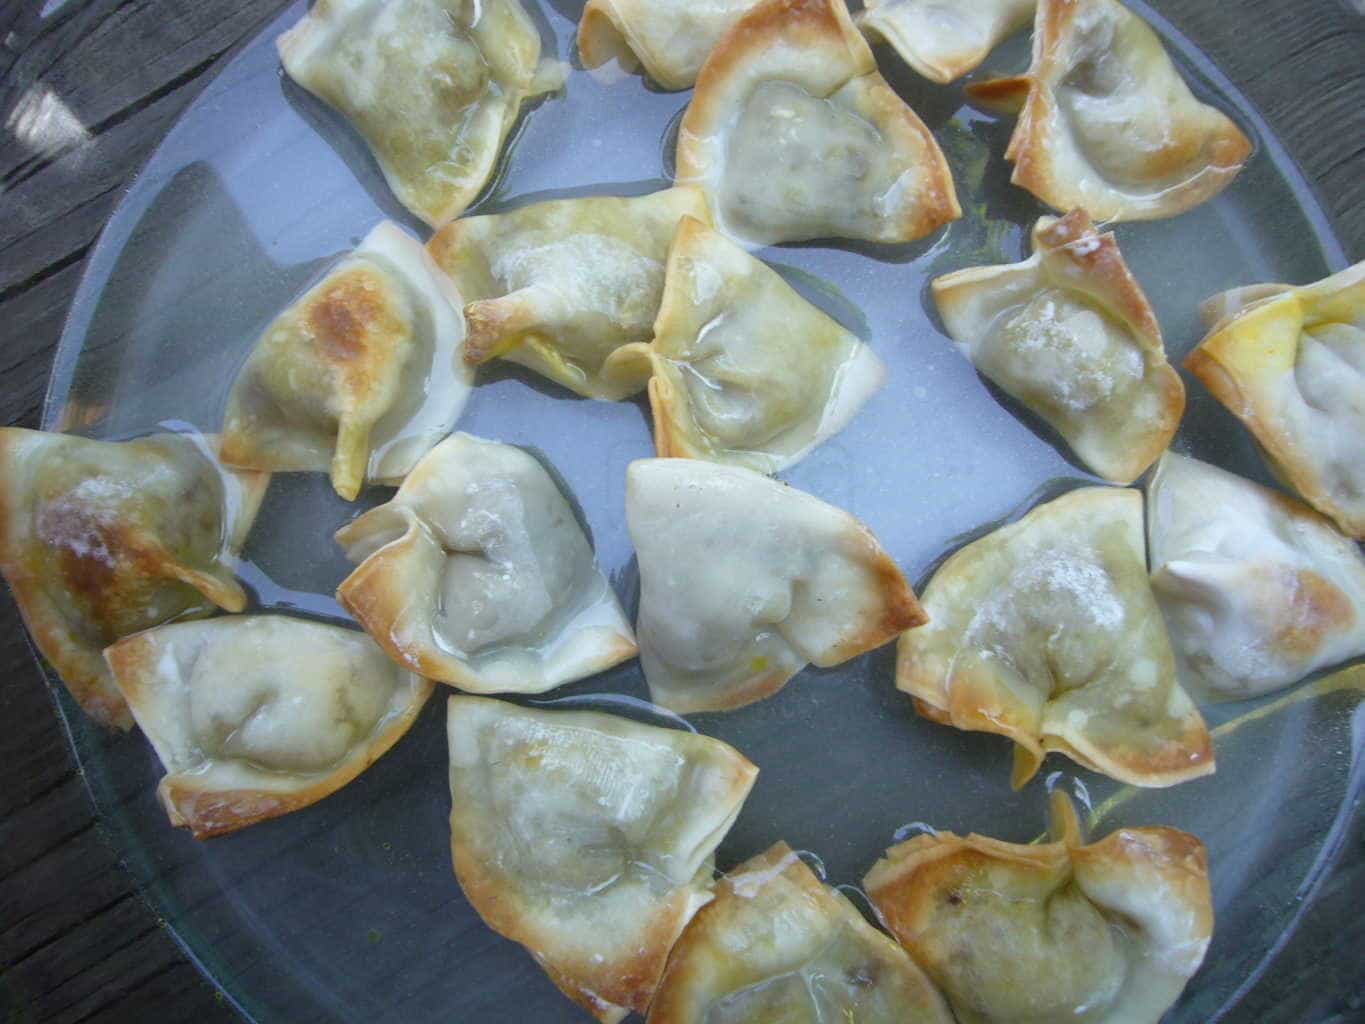 Dumplings roasted in oven and then to be boiled or steamed.